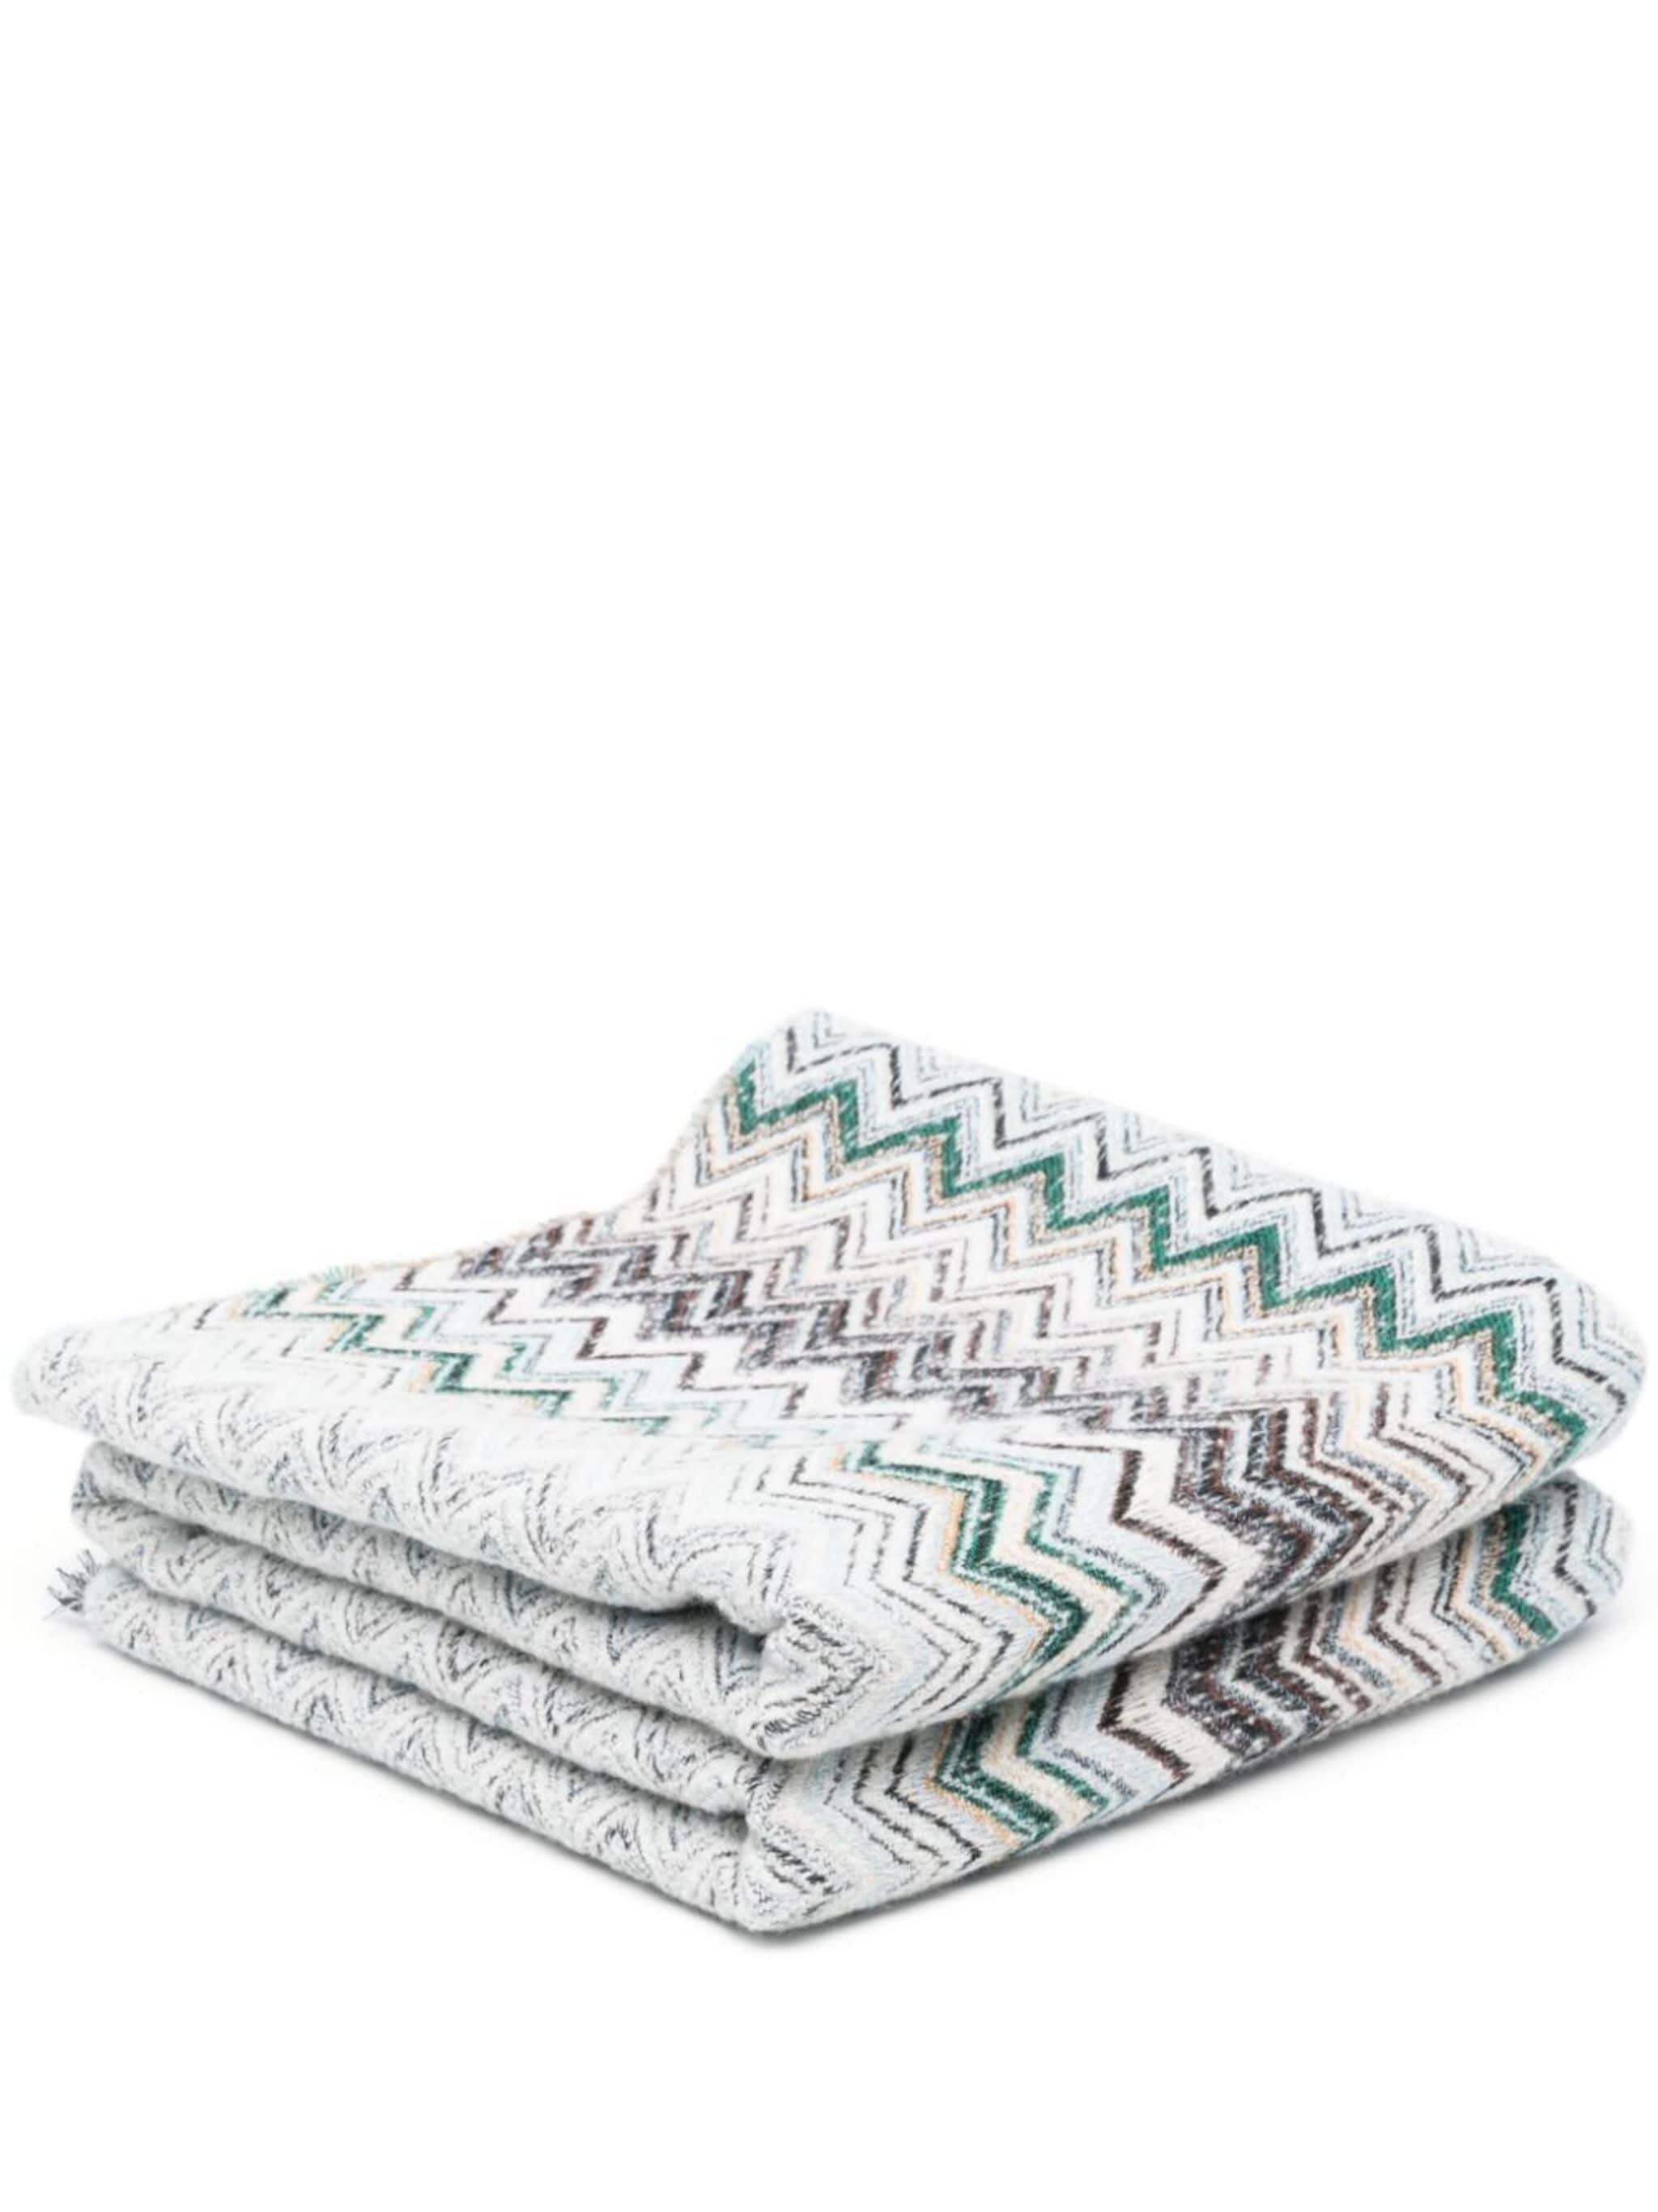 zigzag-woven knitted blanket - 1